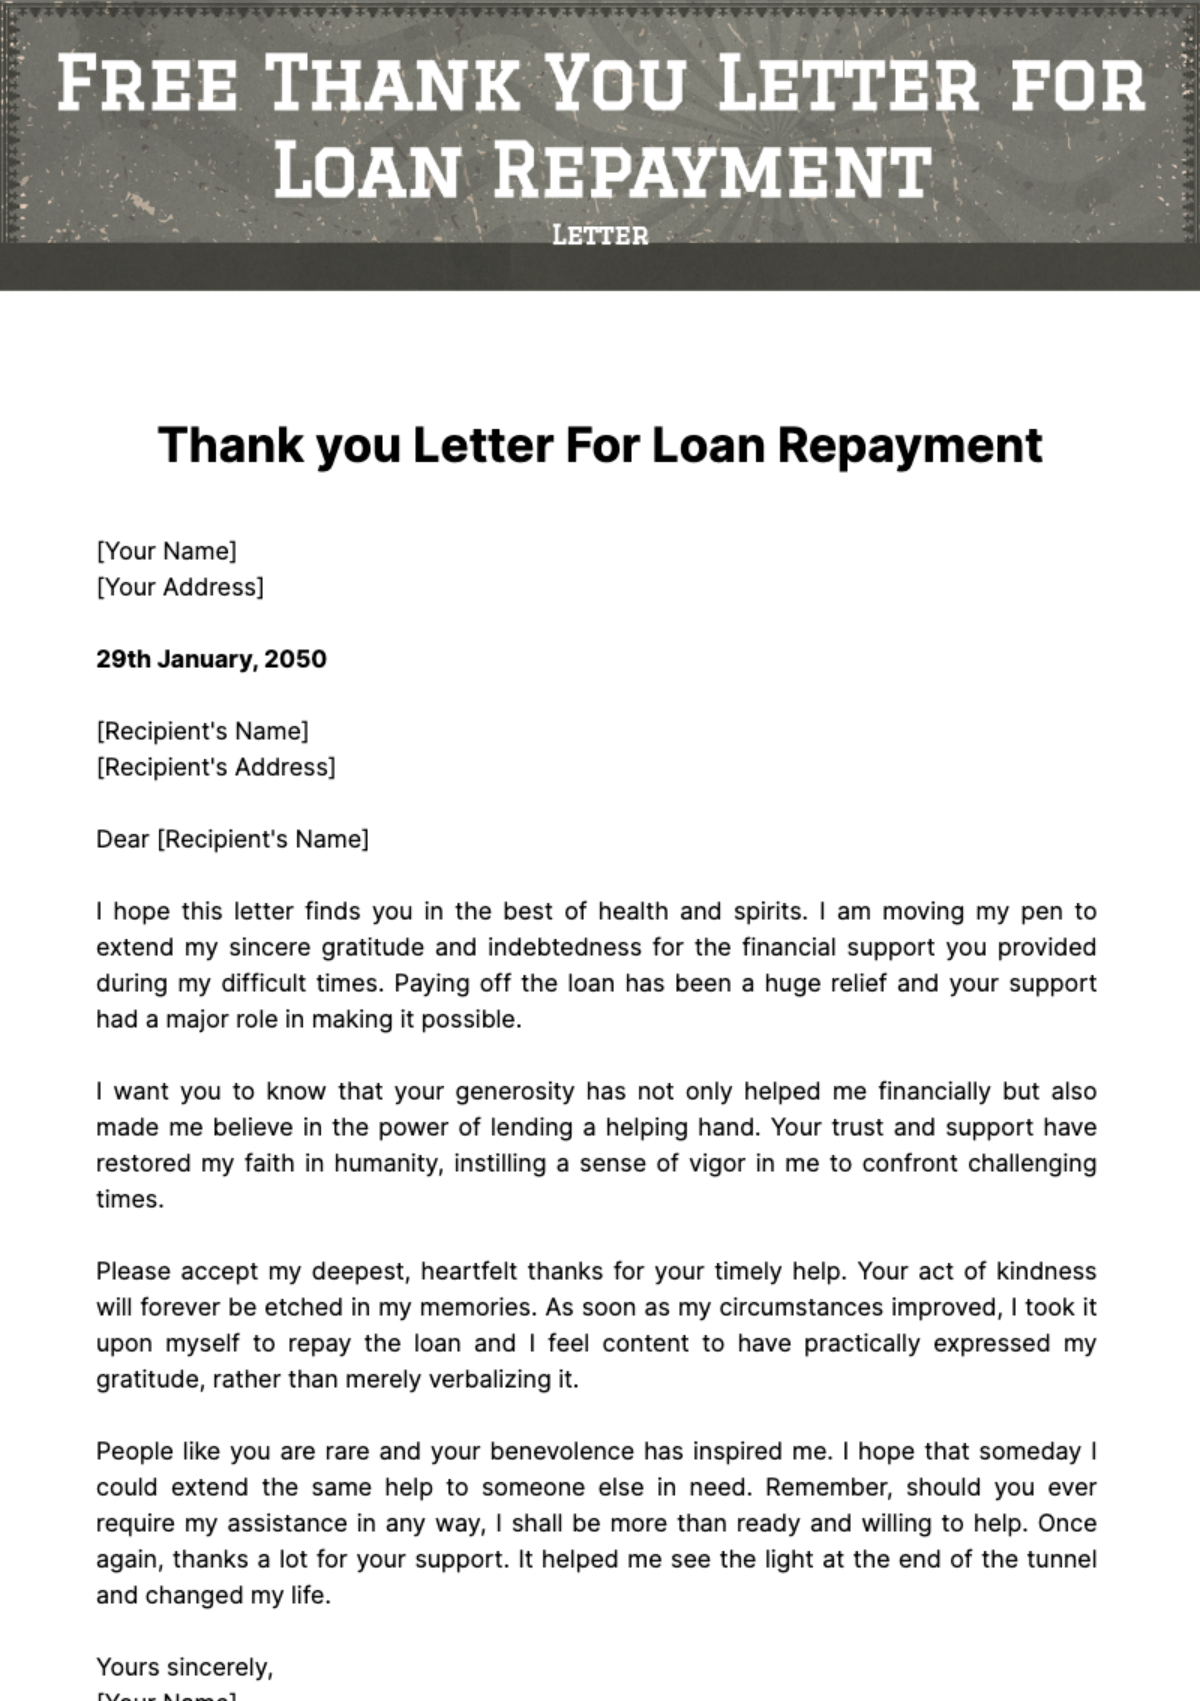 Free Thank you Letter for Loan Repayment Template